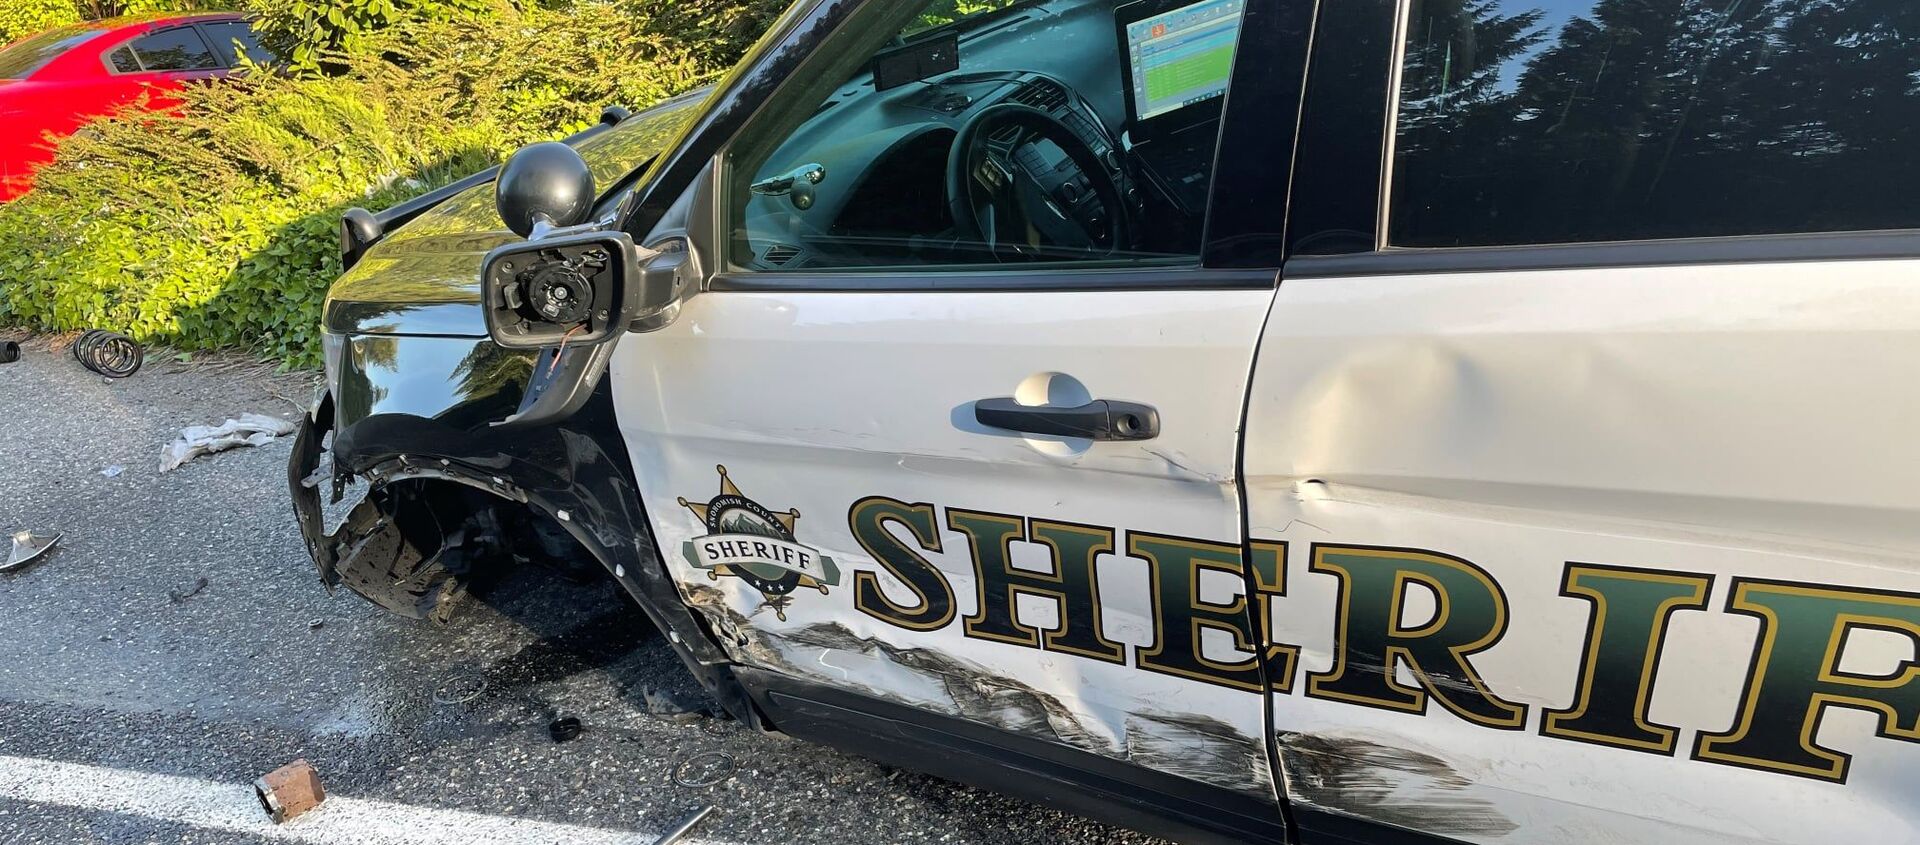 On Saturday, a deputy responded to a collision in the 25200 block of 103rd Ave NE where a vehicle sheared a power pole in half. The deputy parked on the shoulder on the road, with his emergency lights flashing, and exited his vehicle to speak with the Fire units on scene. Approximately 30 seconds later, a Tesla in “autopilot” mode, struck the deputy's vehicle causing significant damage. Thankfully, there were no injuries from this collision. This is a great reminder that vehicles may have autopilot to assist, but it cannot be relied upon to get you safely from one destination to the next. - Sputnik International, 1920, 19.05.2021